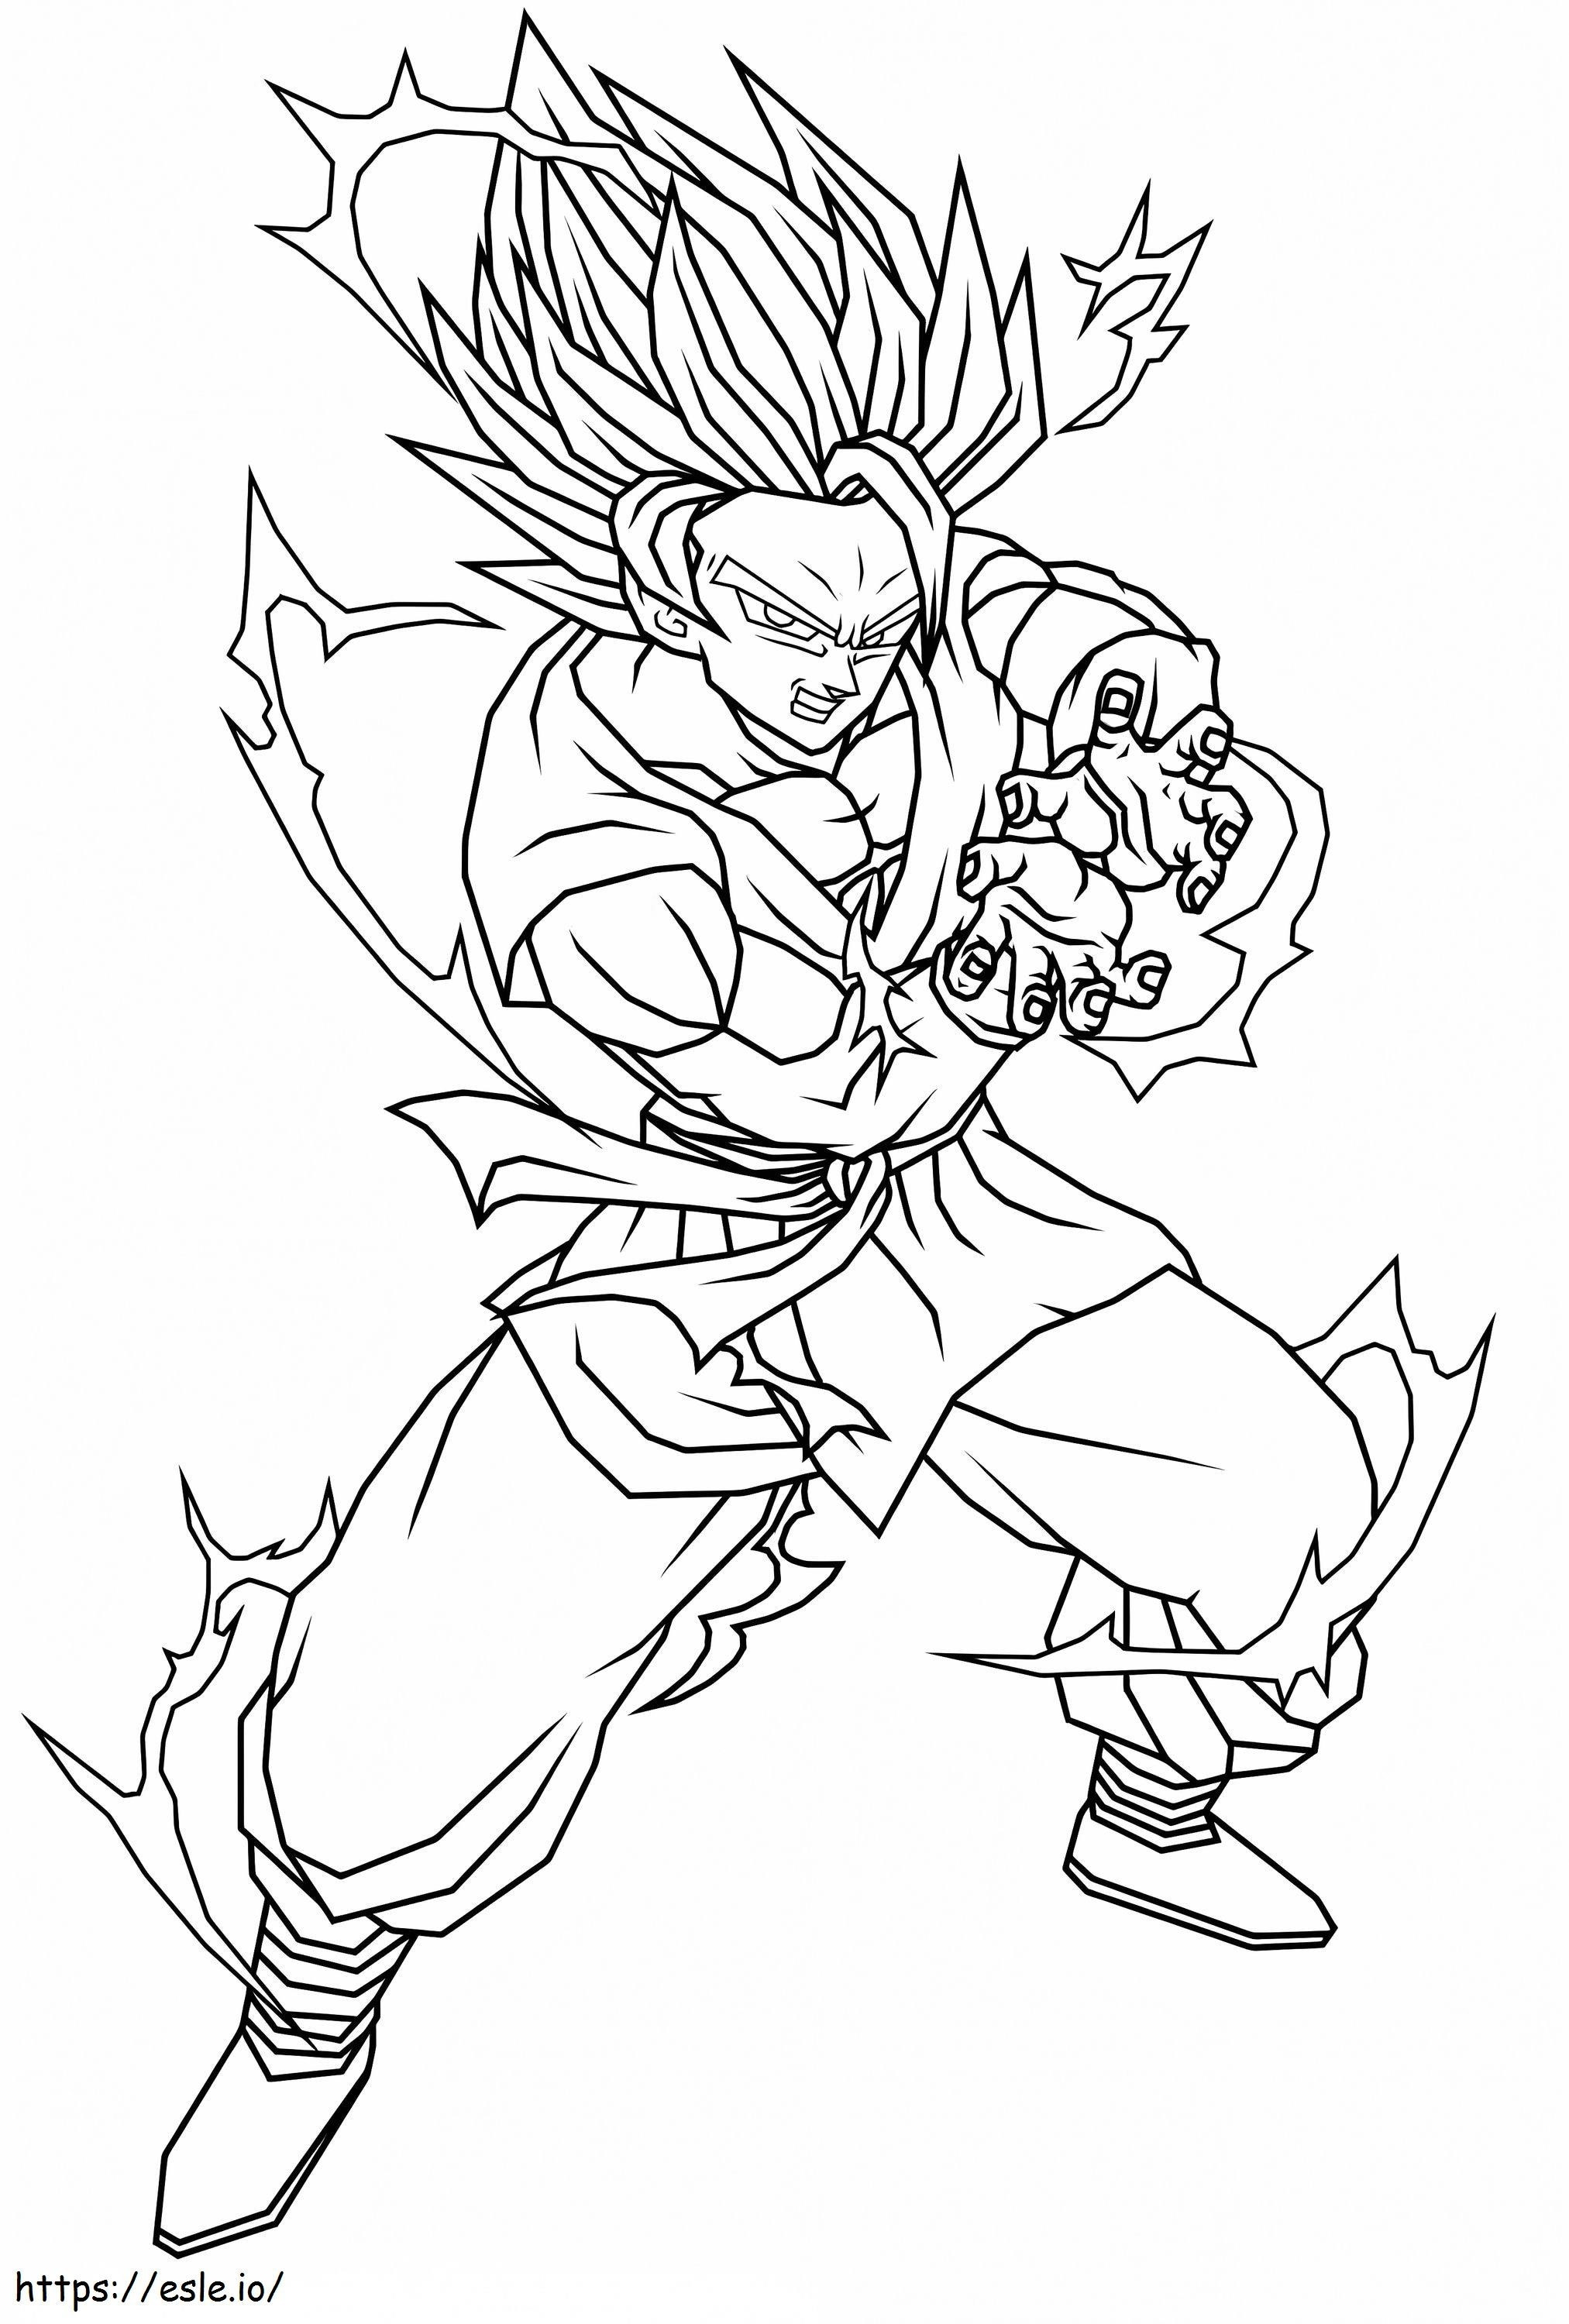 Powerful Son Goku coloring page